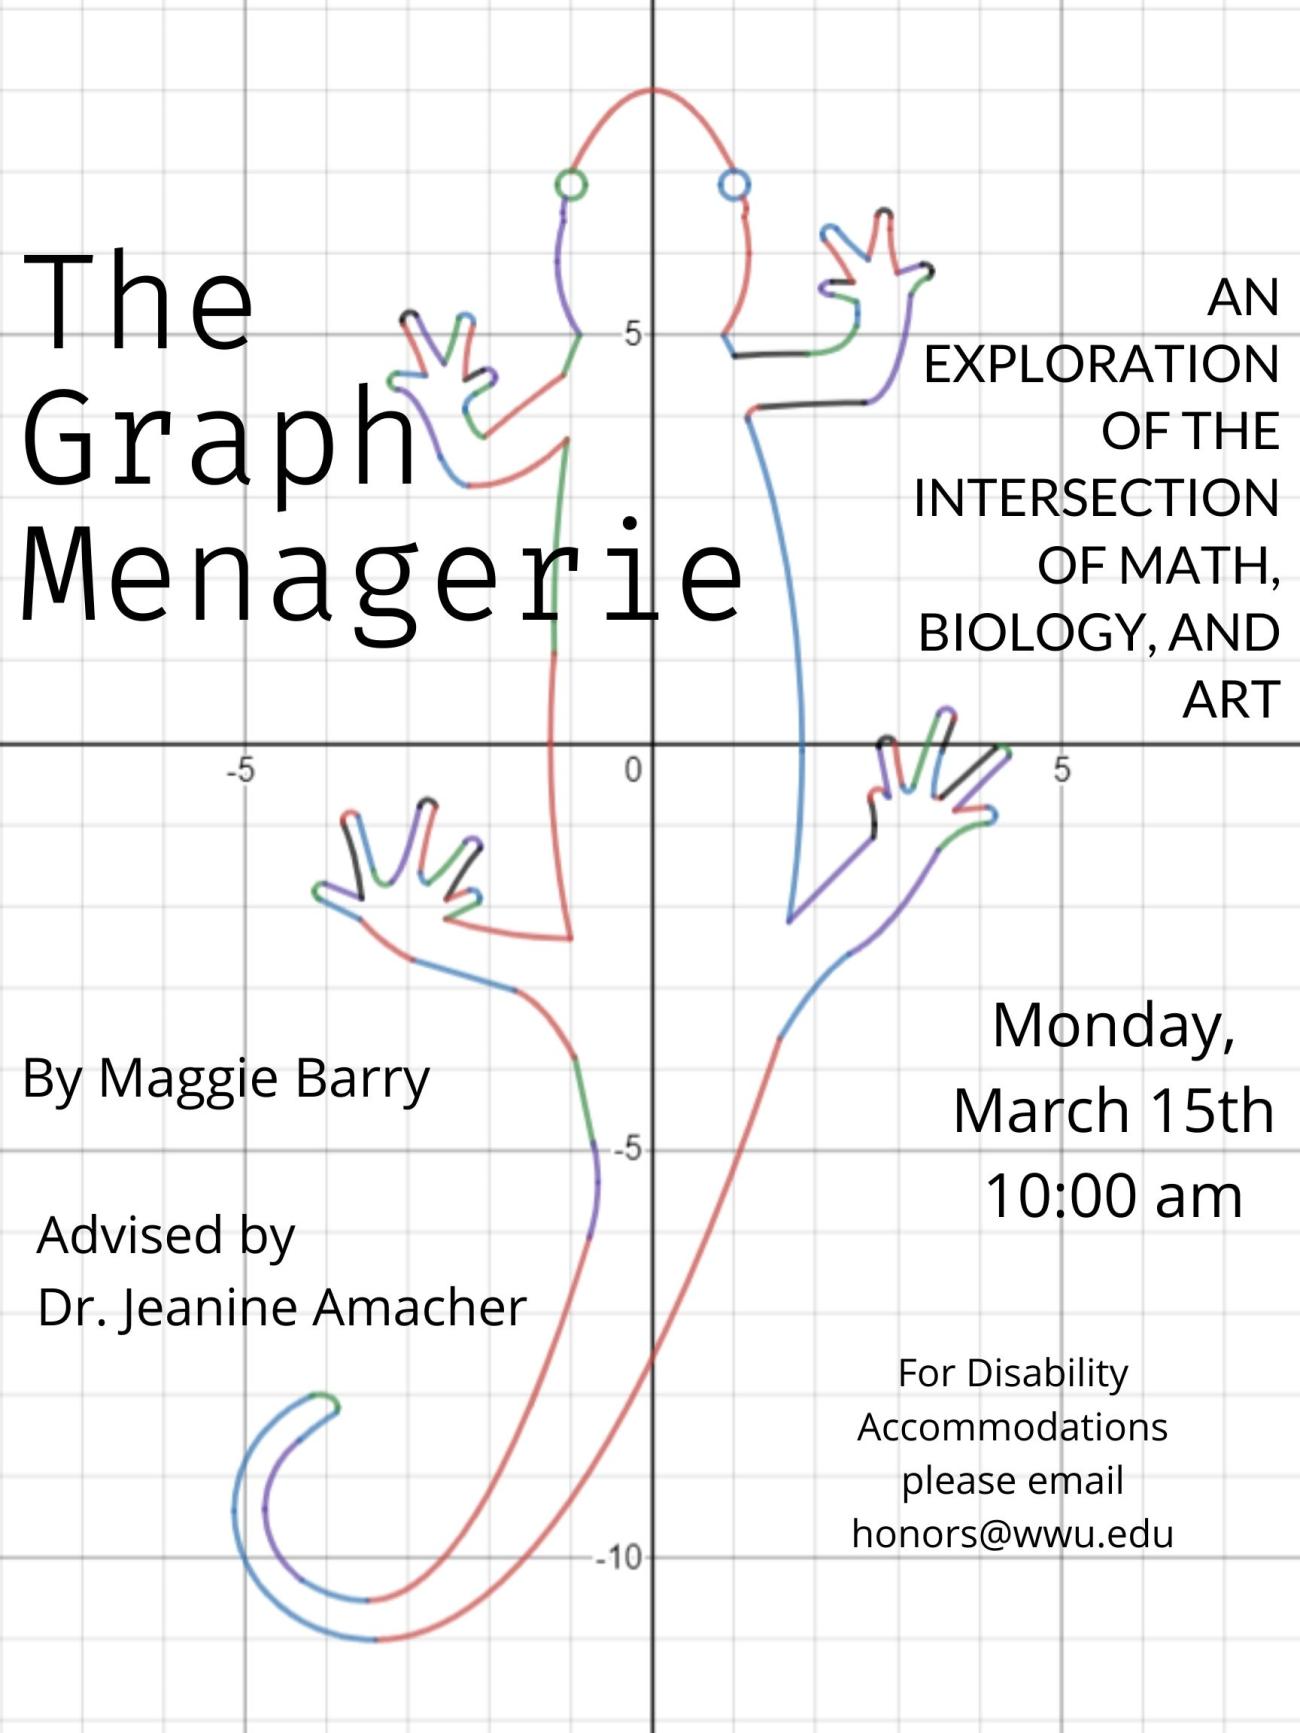 Image: An outline of a salamander made from equations on a graph. Text: "The Graph Menagerie: an exploration of the intersection of math, biology, and art. By Maggie Barry, advised by Dr. Jeanine Amacher. Monday, March 15th 10:00 am. For disability accommodations please email honors@wwu.edu"